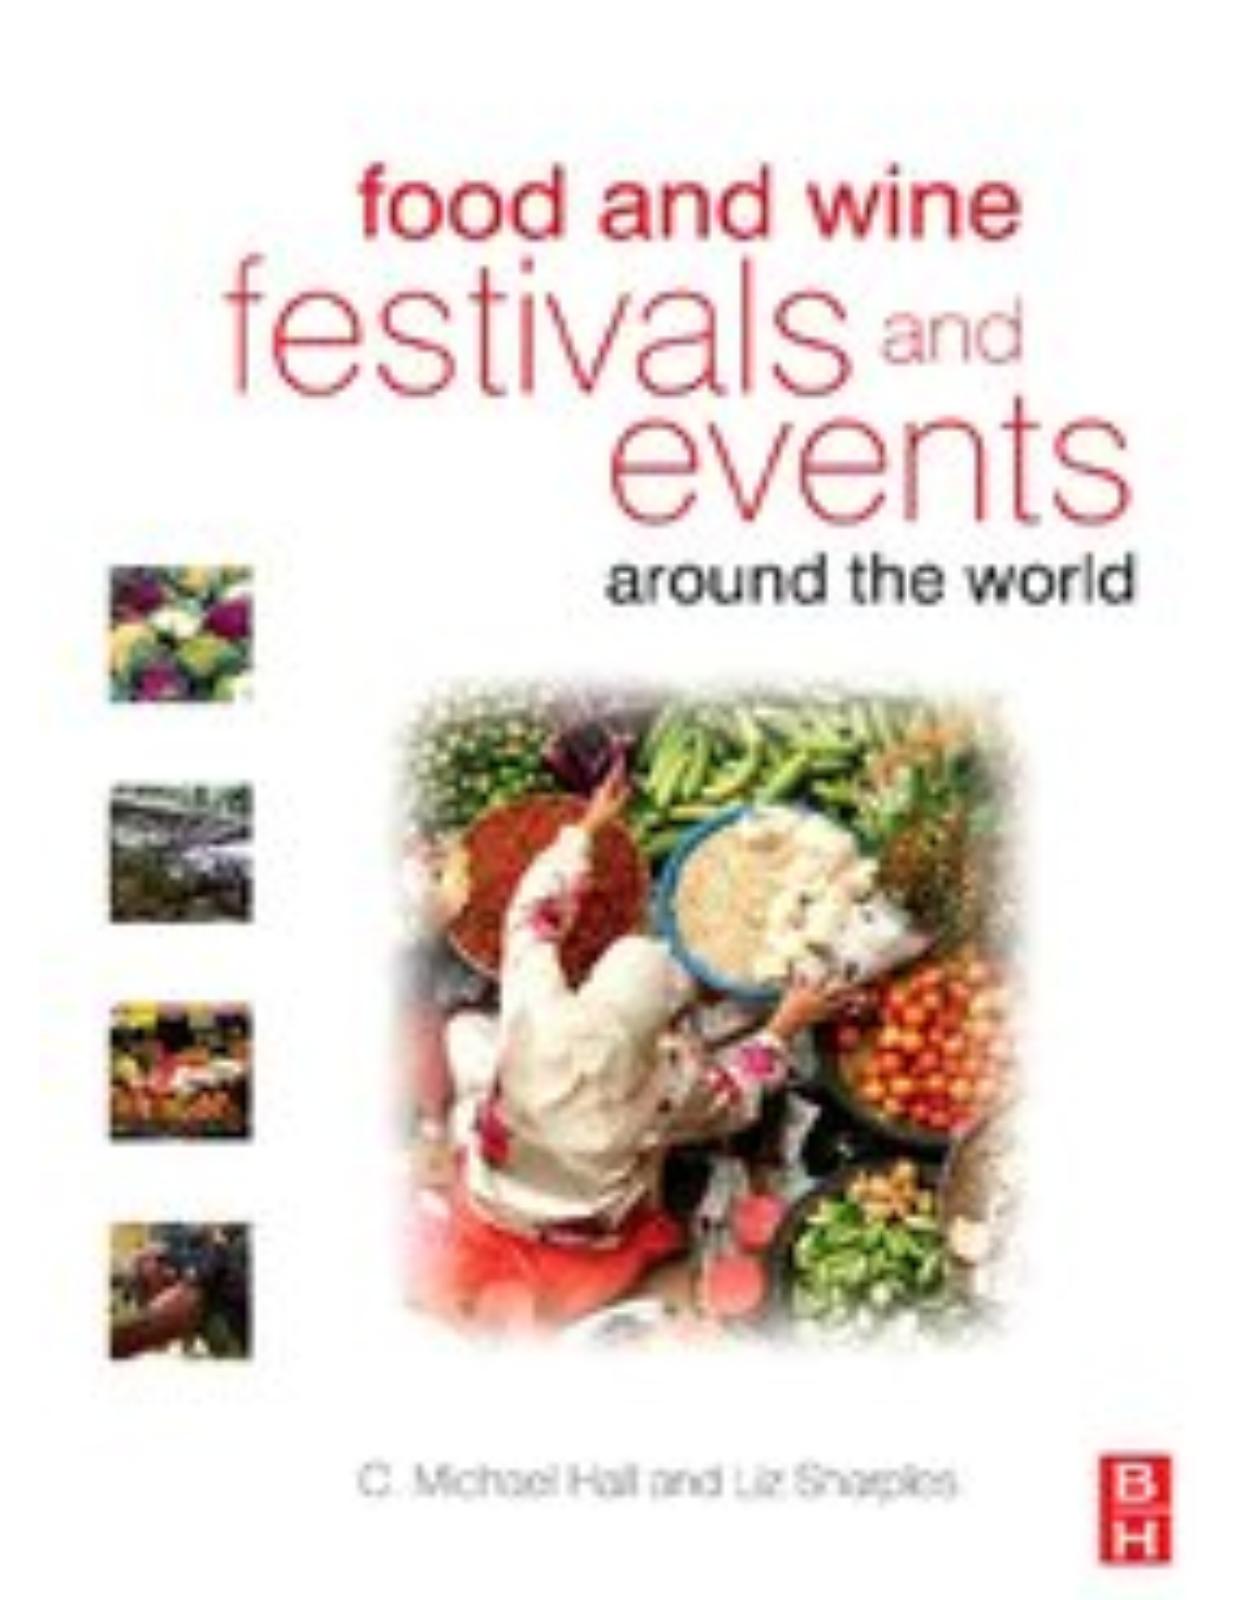 Food and Wine Festivals and Events Around the World